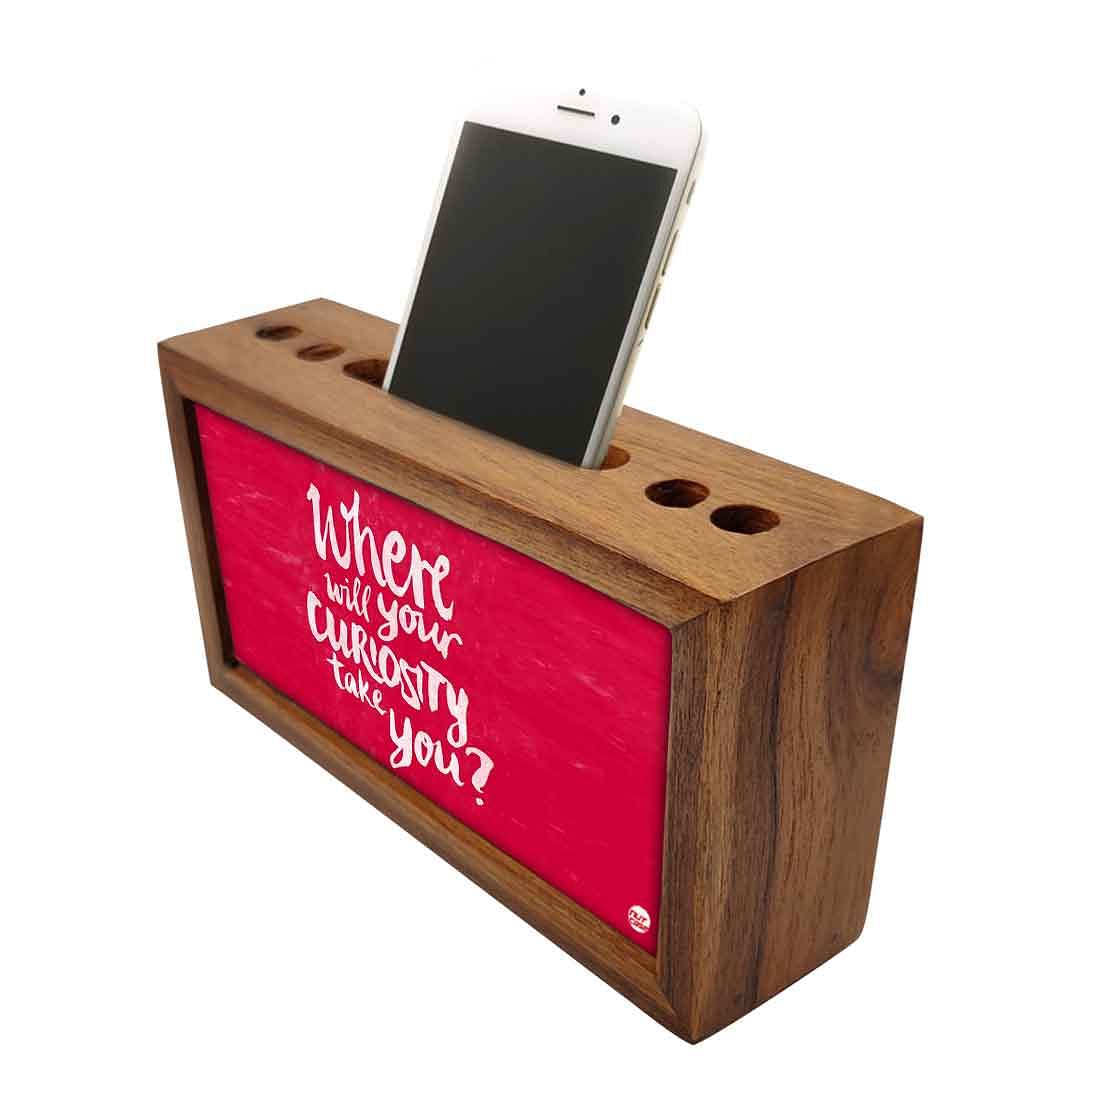 Wooden desk organizer Pen Mobile Stand - Where Will Your Curiosity Take You Nutcase